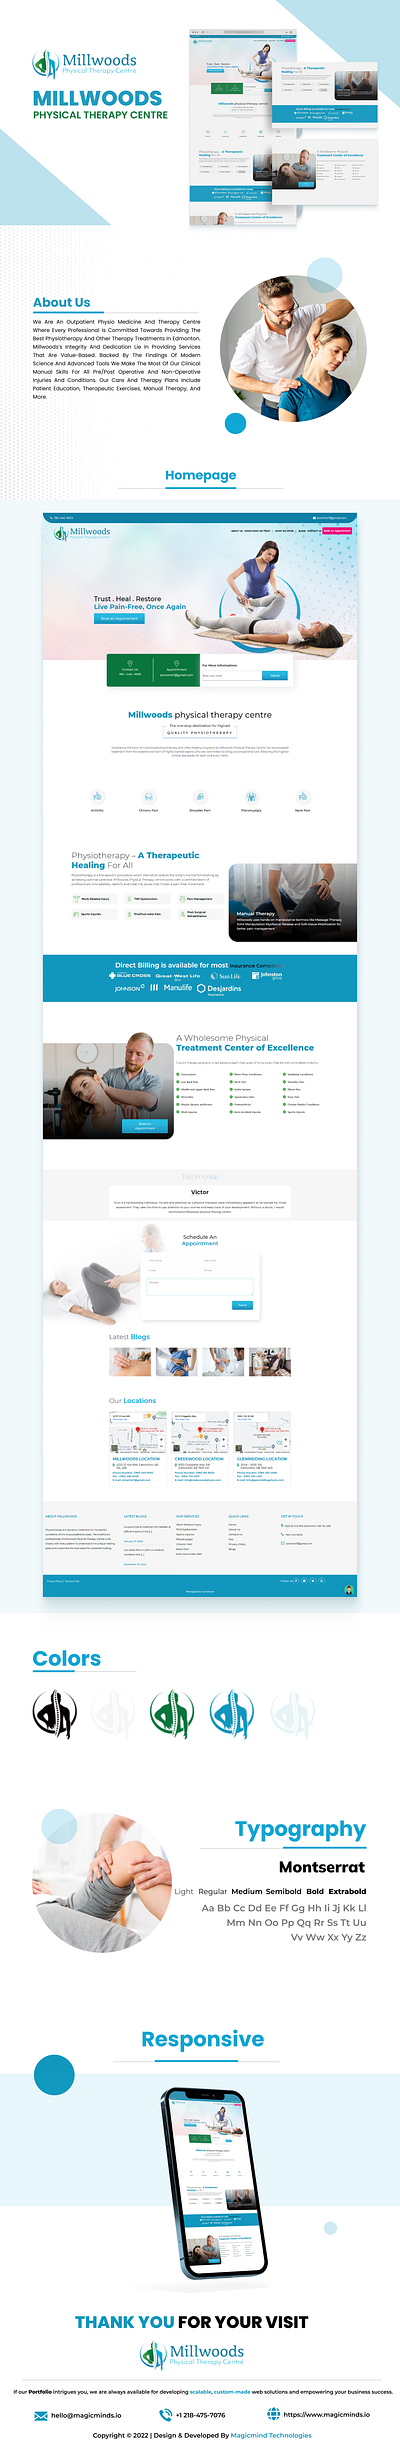 Millwoods Physical Therapy Centre - Website for Physiotherapy branding design graphic design ui ux websitedevelopment wordpresswebsite